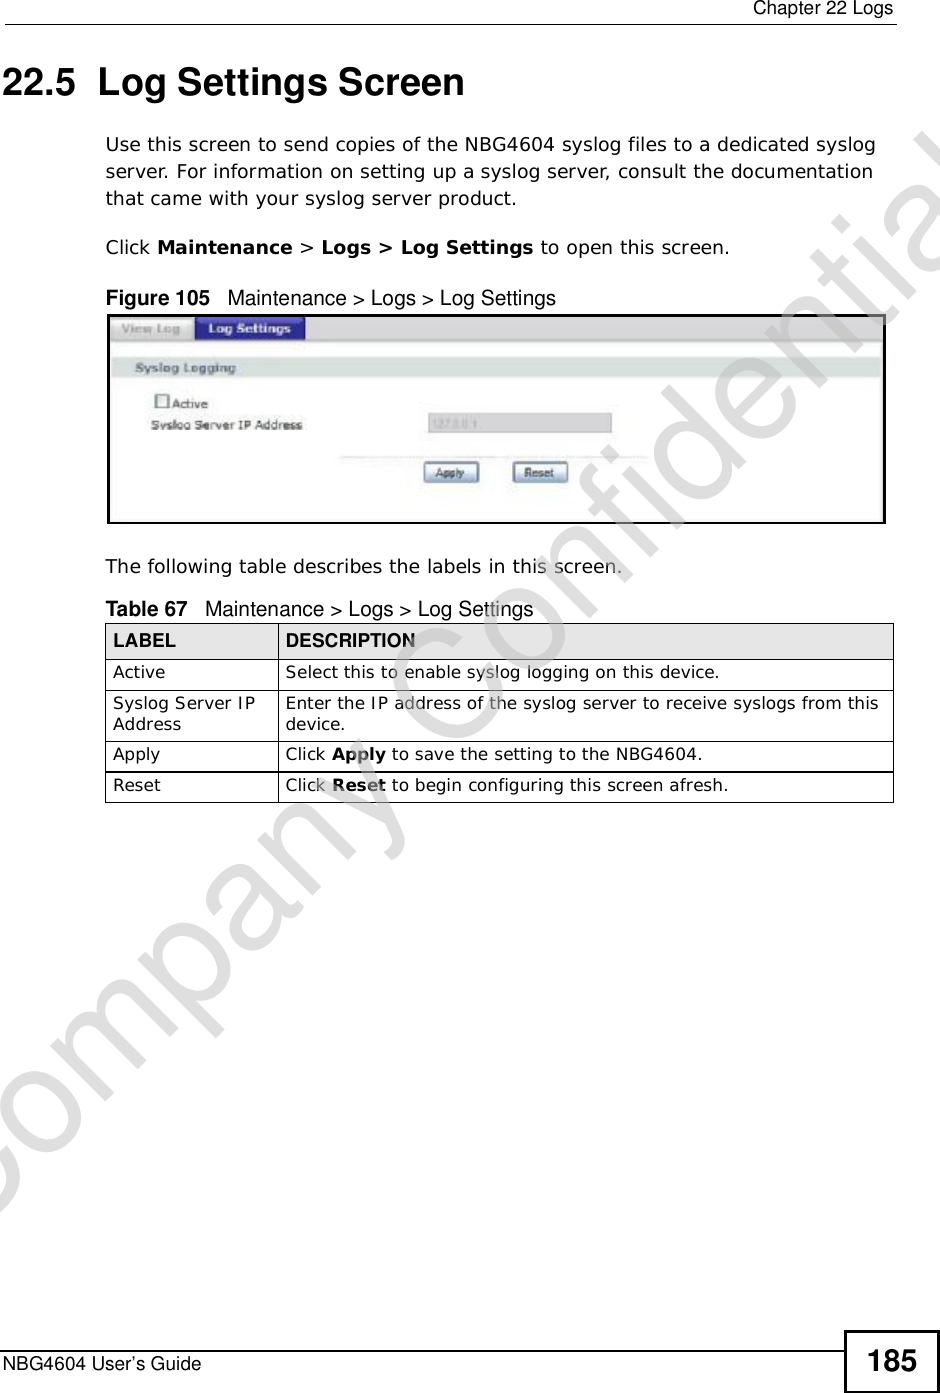  Chapter 22LogsNBG4604 User’s Guide 18522.5  Log Settings ScreenUse this screen to send copies of the NBG4604 syslog files to a dedicated syslog server. For information on setting up a syslog server, consult the documentation that came with your syslog server product.Click Maintenance &gt; Logs &gt; Log Settings to open this screen.Figure 105   Maintenance &gt; Logs &gt; Log Settings The following table describes the labels in this screen.Table 67   Maintenance &gt; Logs &gt; Log SettingsLABEL DESCRIPTIONActive Select this to enable syslog logging on this device.Syslog Server IP Address Enter the IP address of the syslog server to receive syslogs from this device.Apply Click Apply to save the setting to the NBG4604.Reset Click Reset to begin configuring this screen afresh.Company Confidential